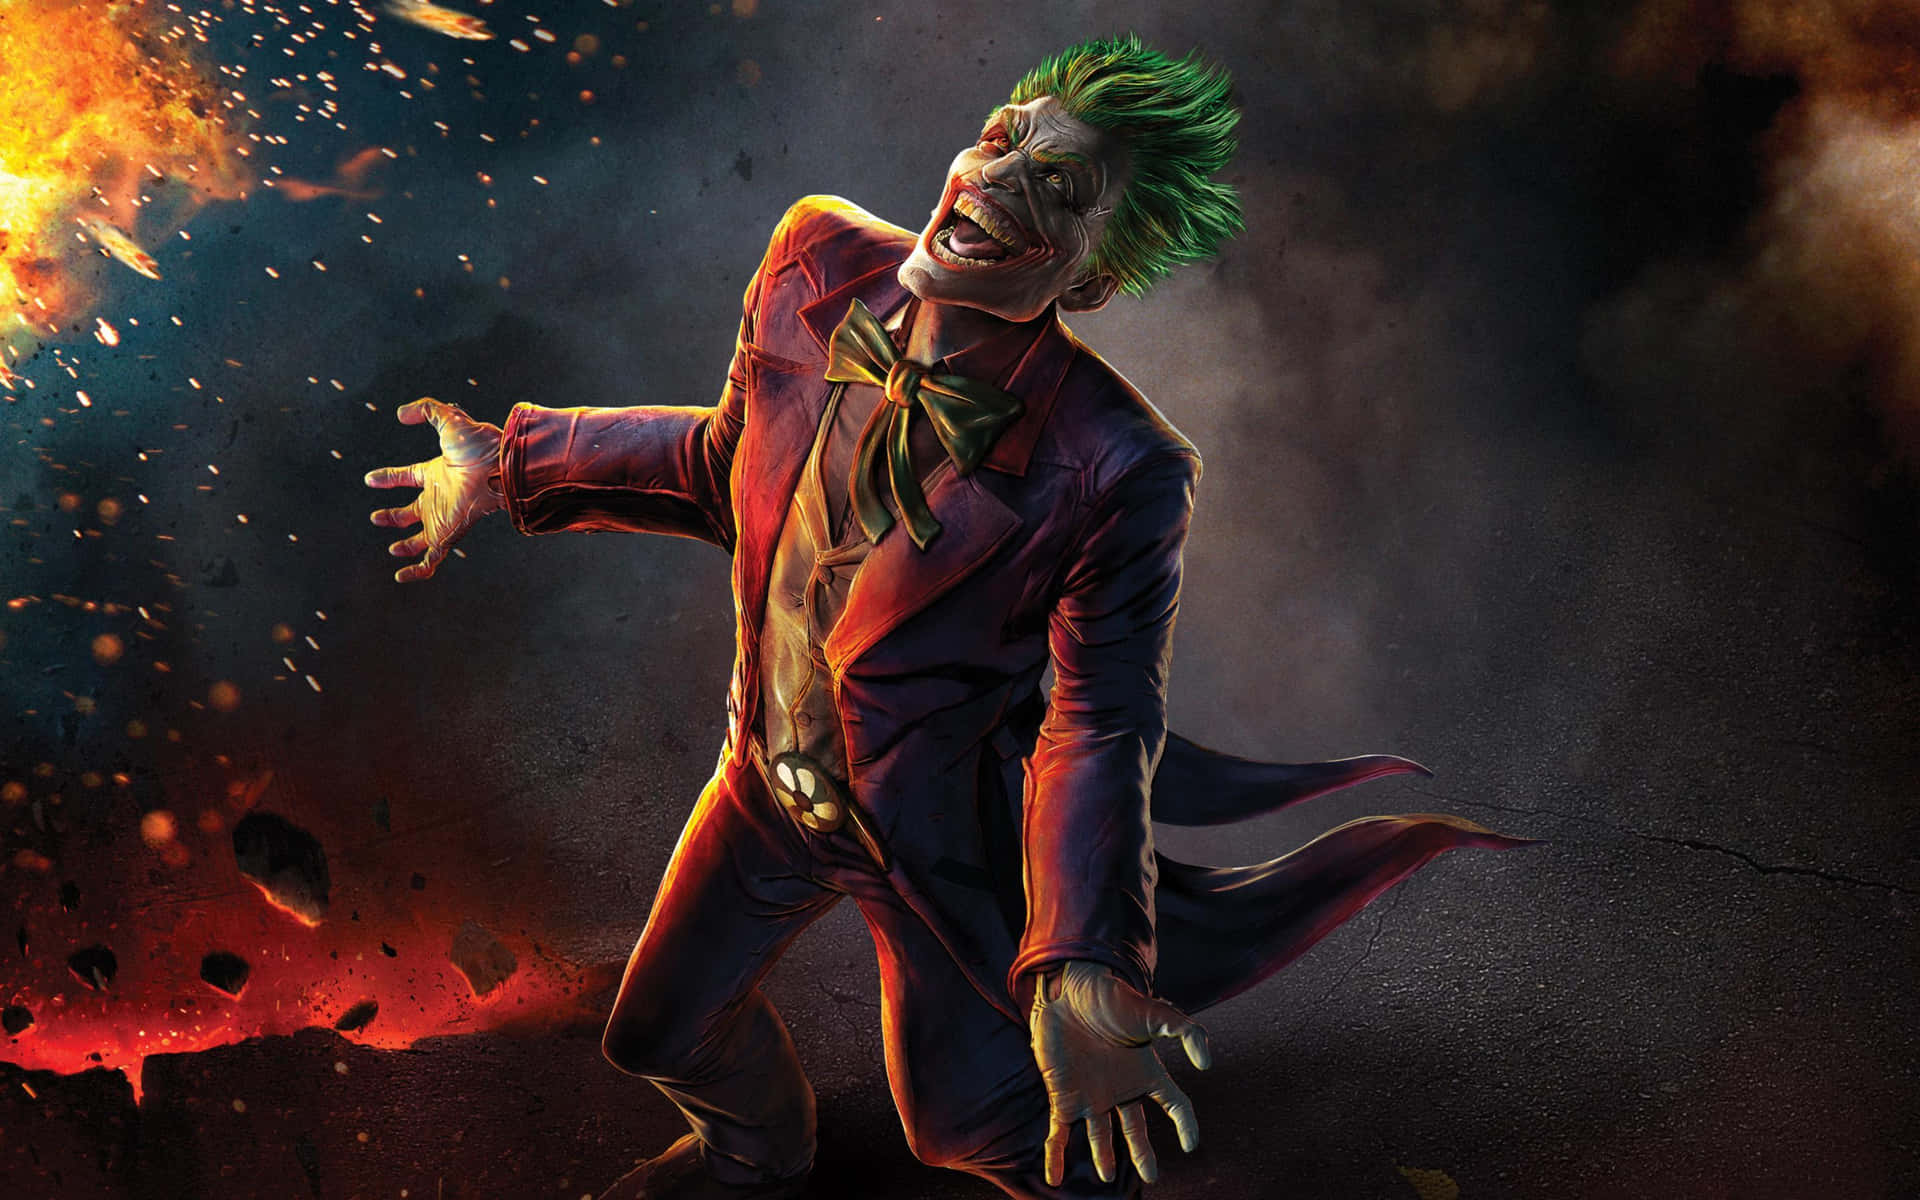 Maniacal Joker Laughing In The Dark Background